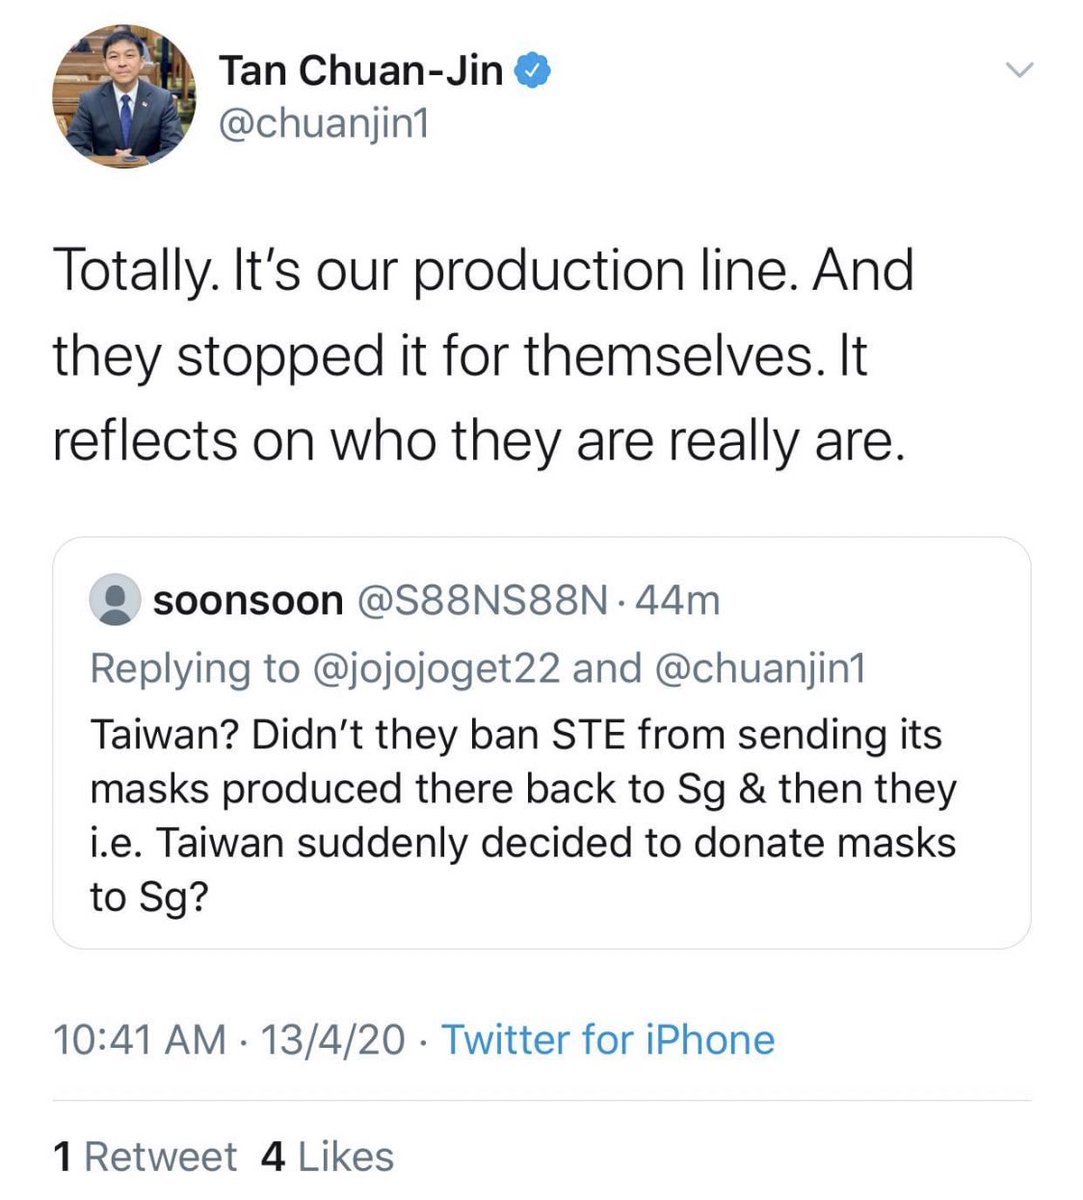 Did anyone see reporting or outcry about  #Taiwan banning mask exports affecting  #Singapore in February? I’m curious how this all seems to be coming out now that Taiwan has offered to donate masks to us. This is our Speaker of Parliament 